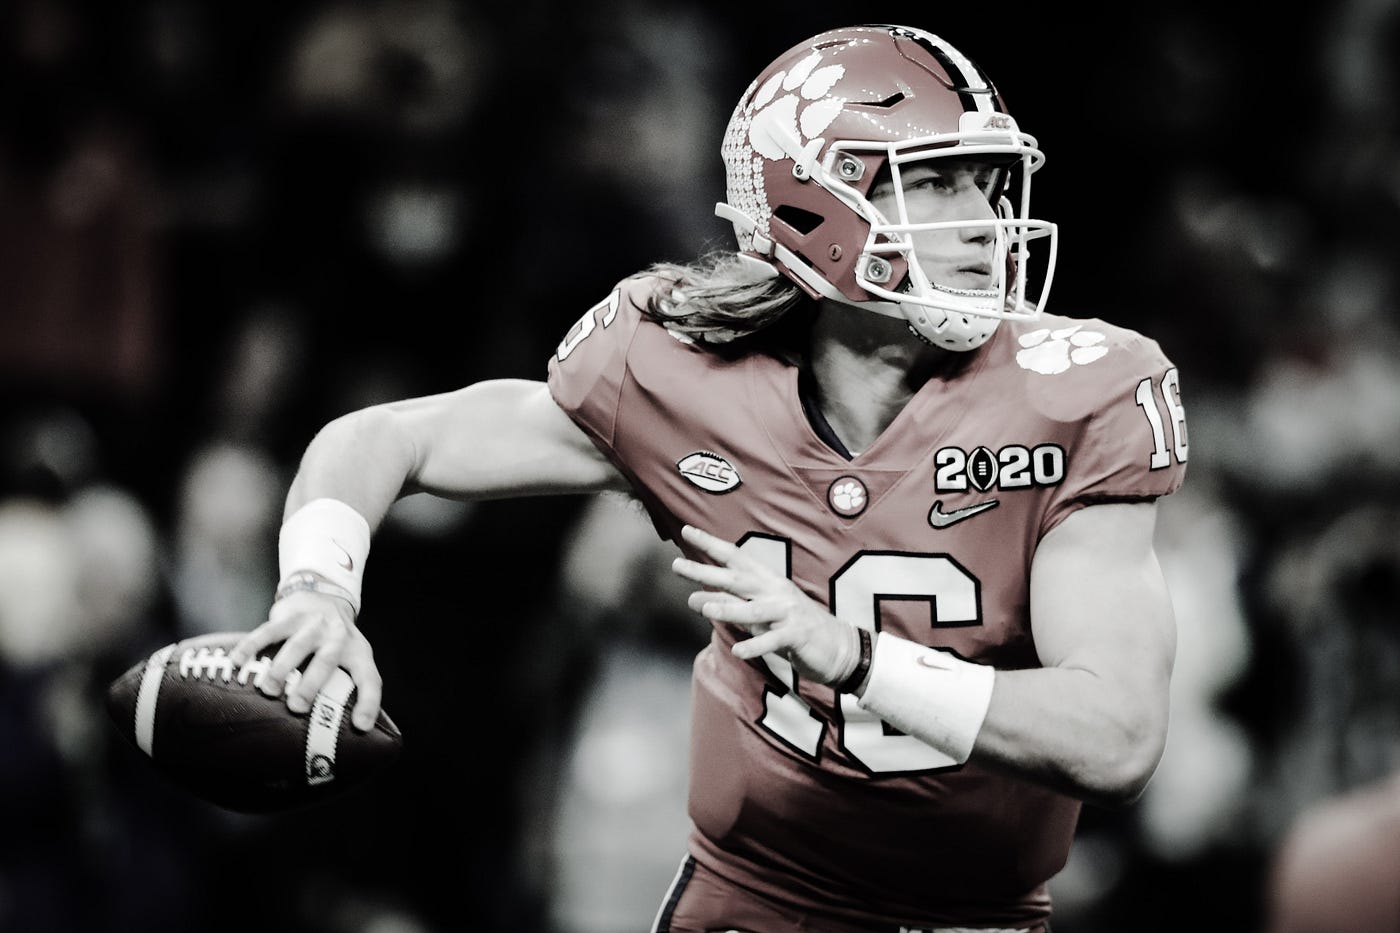 NFL Draft prospects 2021: Big board of top 100 players overall